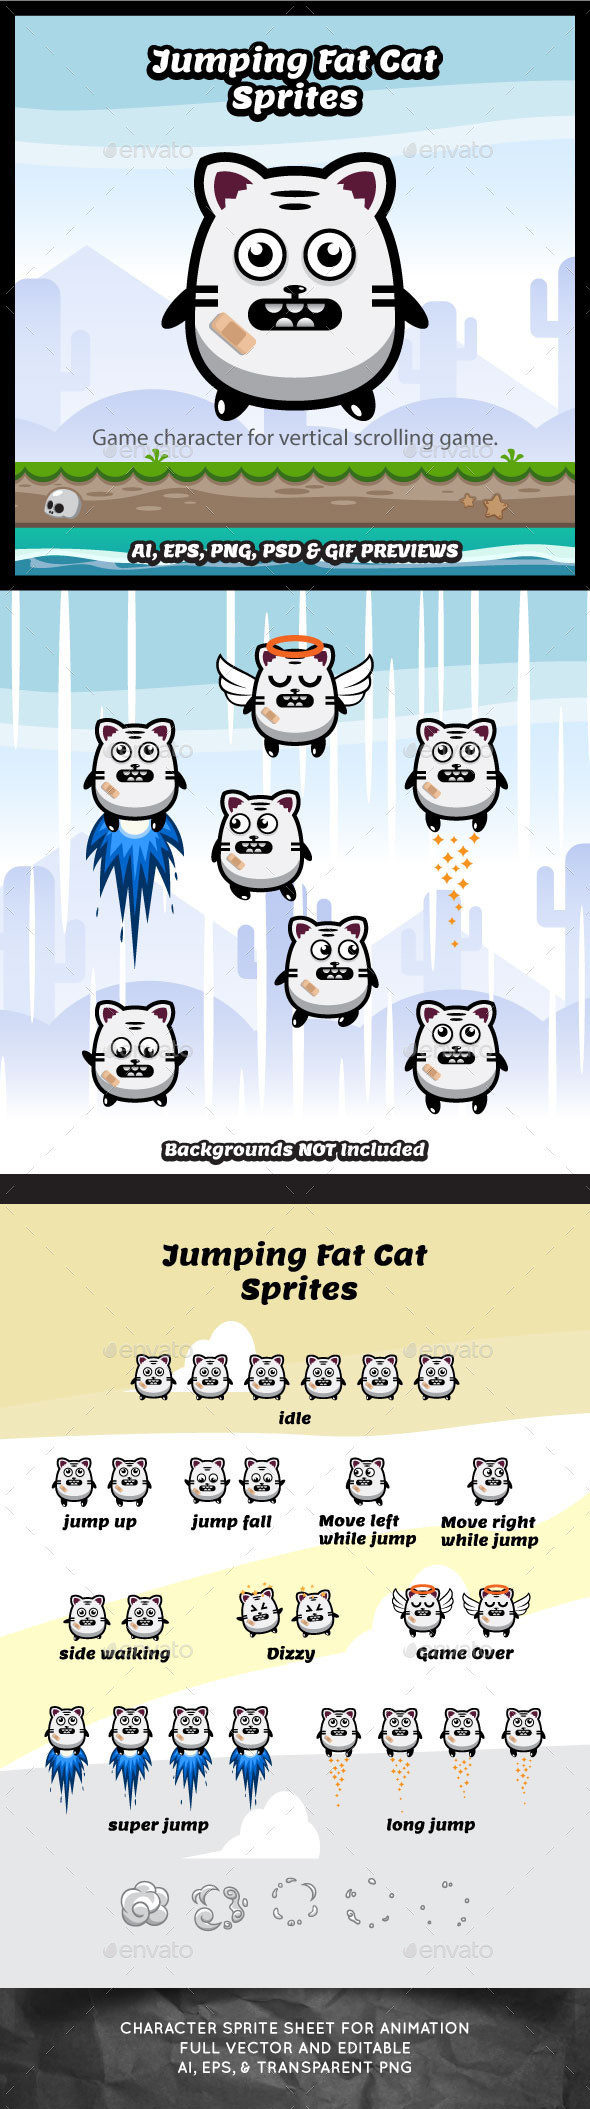 Jumping fat cat game character sprite sheet sidescroller game asset animation mobile games gameart game art 590